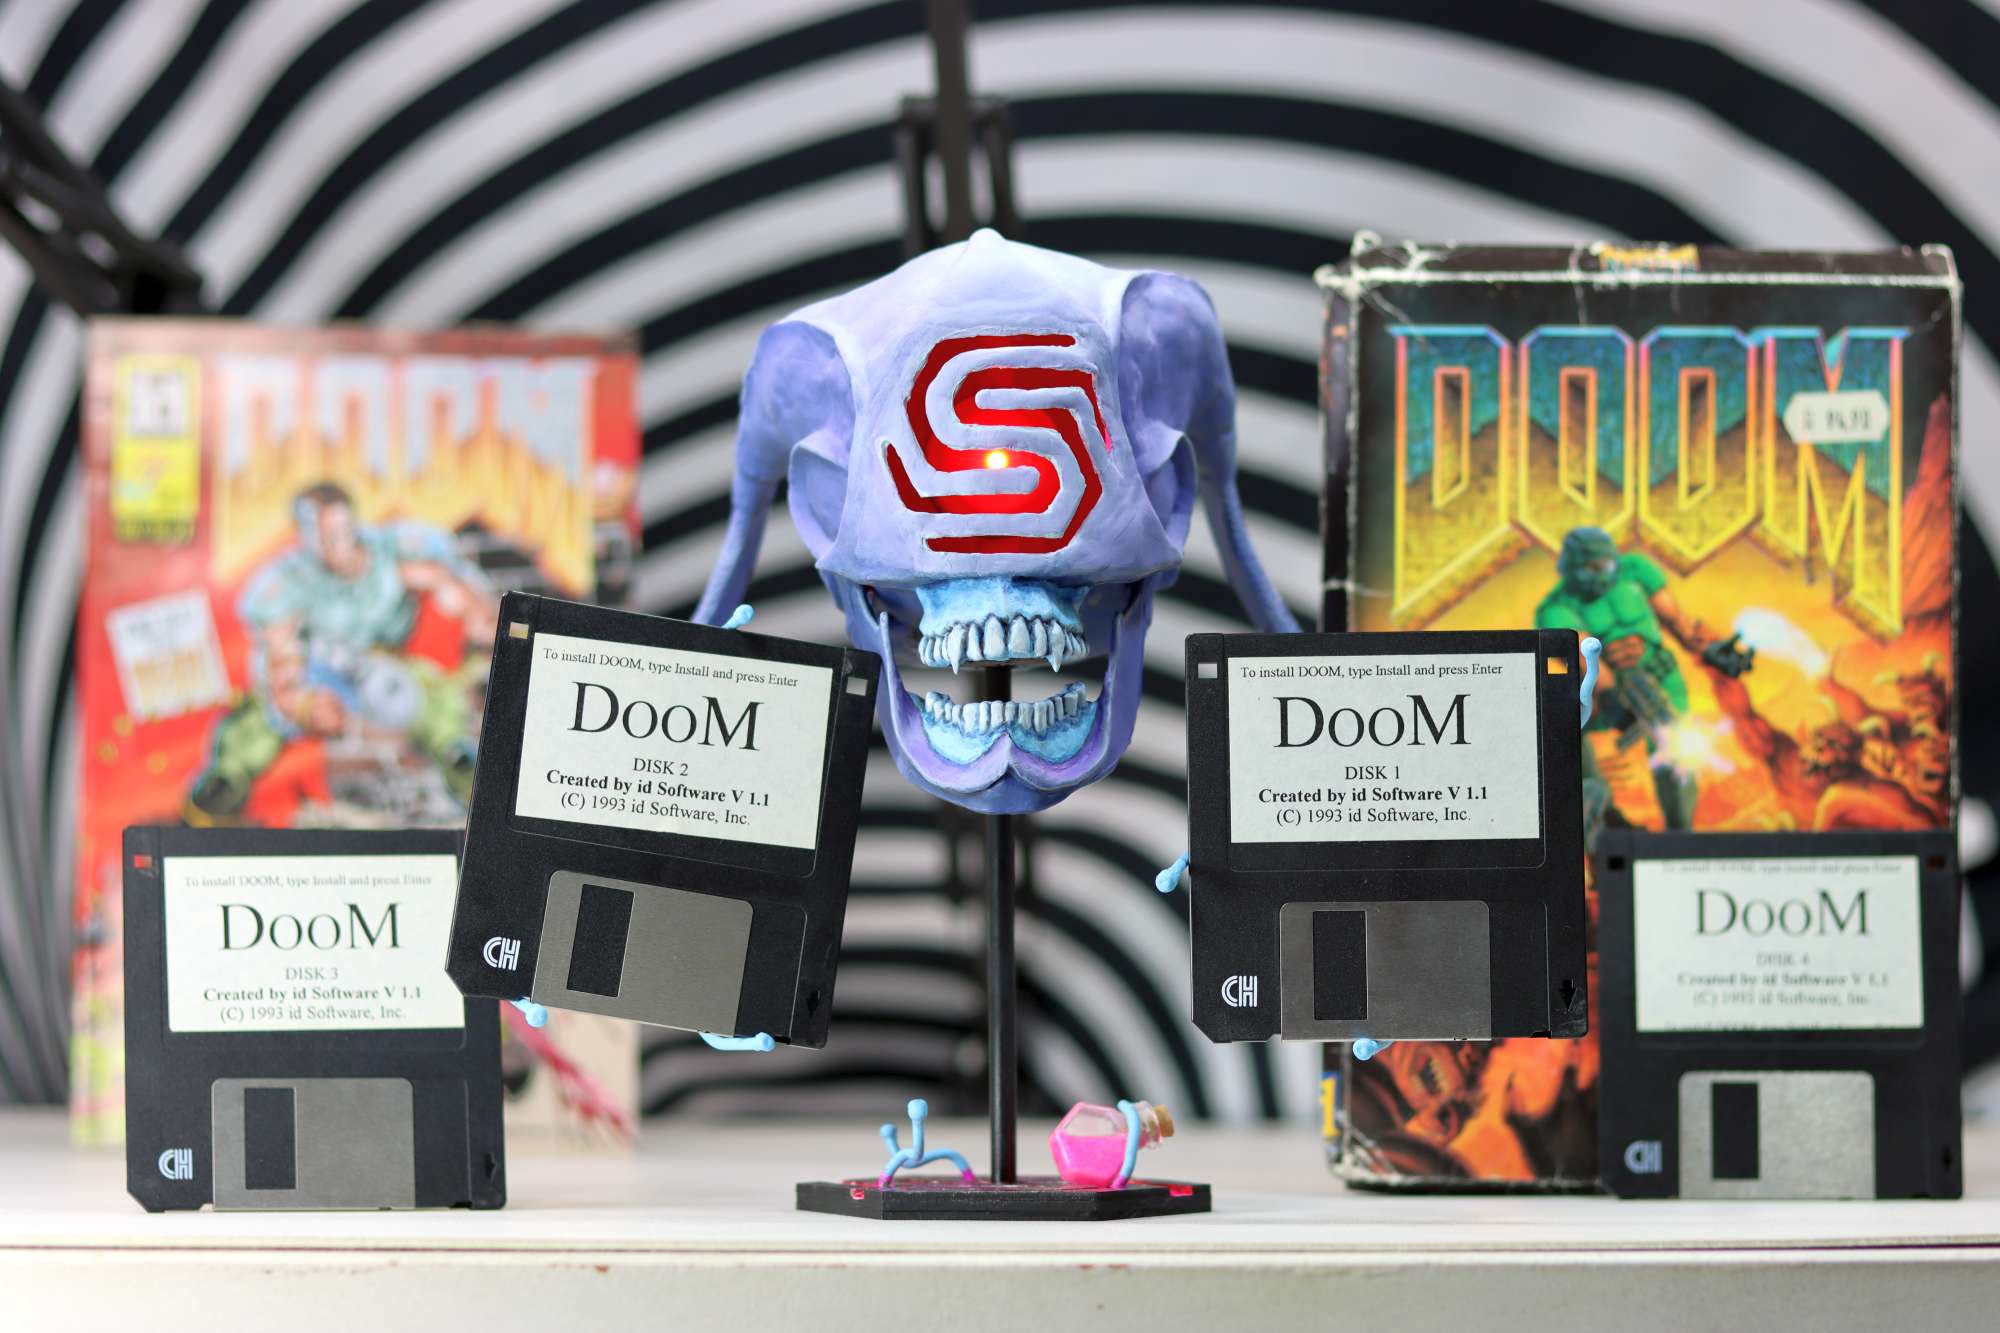 Scidemon with Floppy Disks